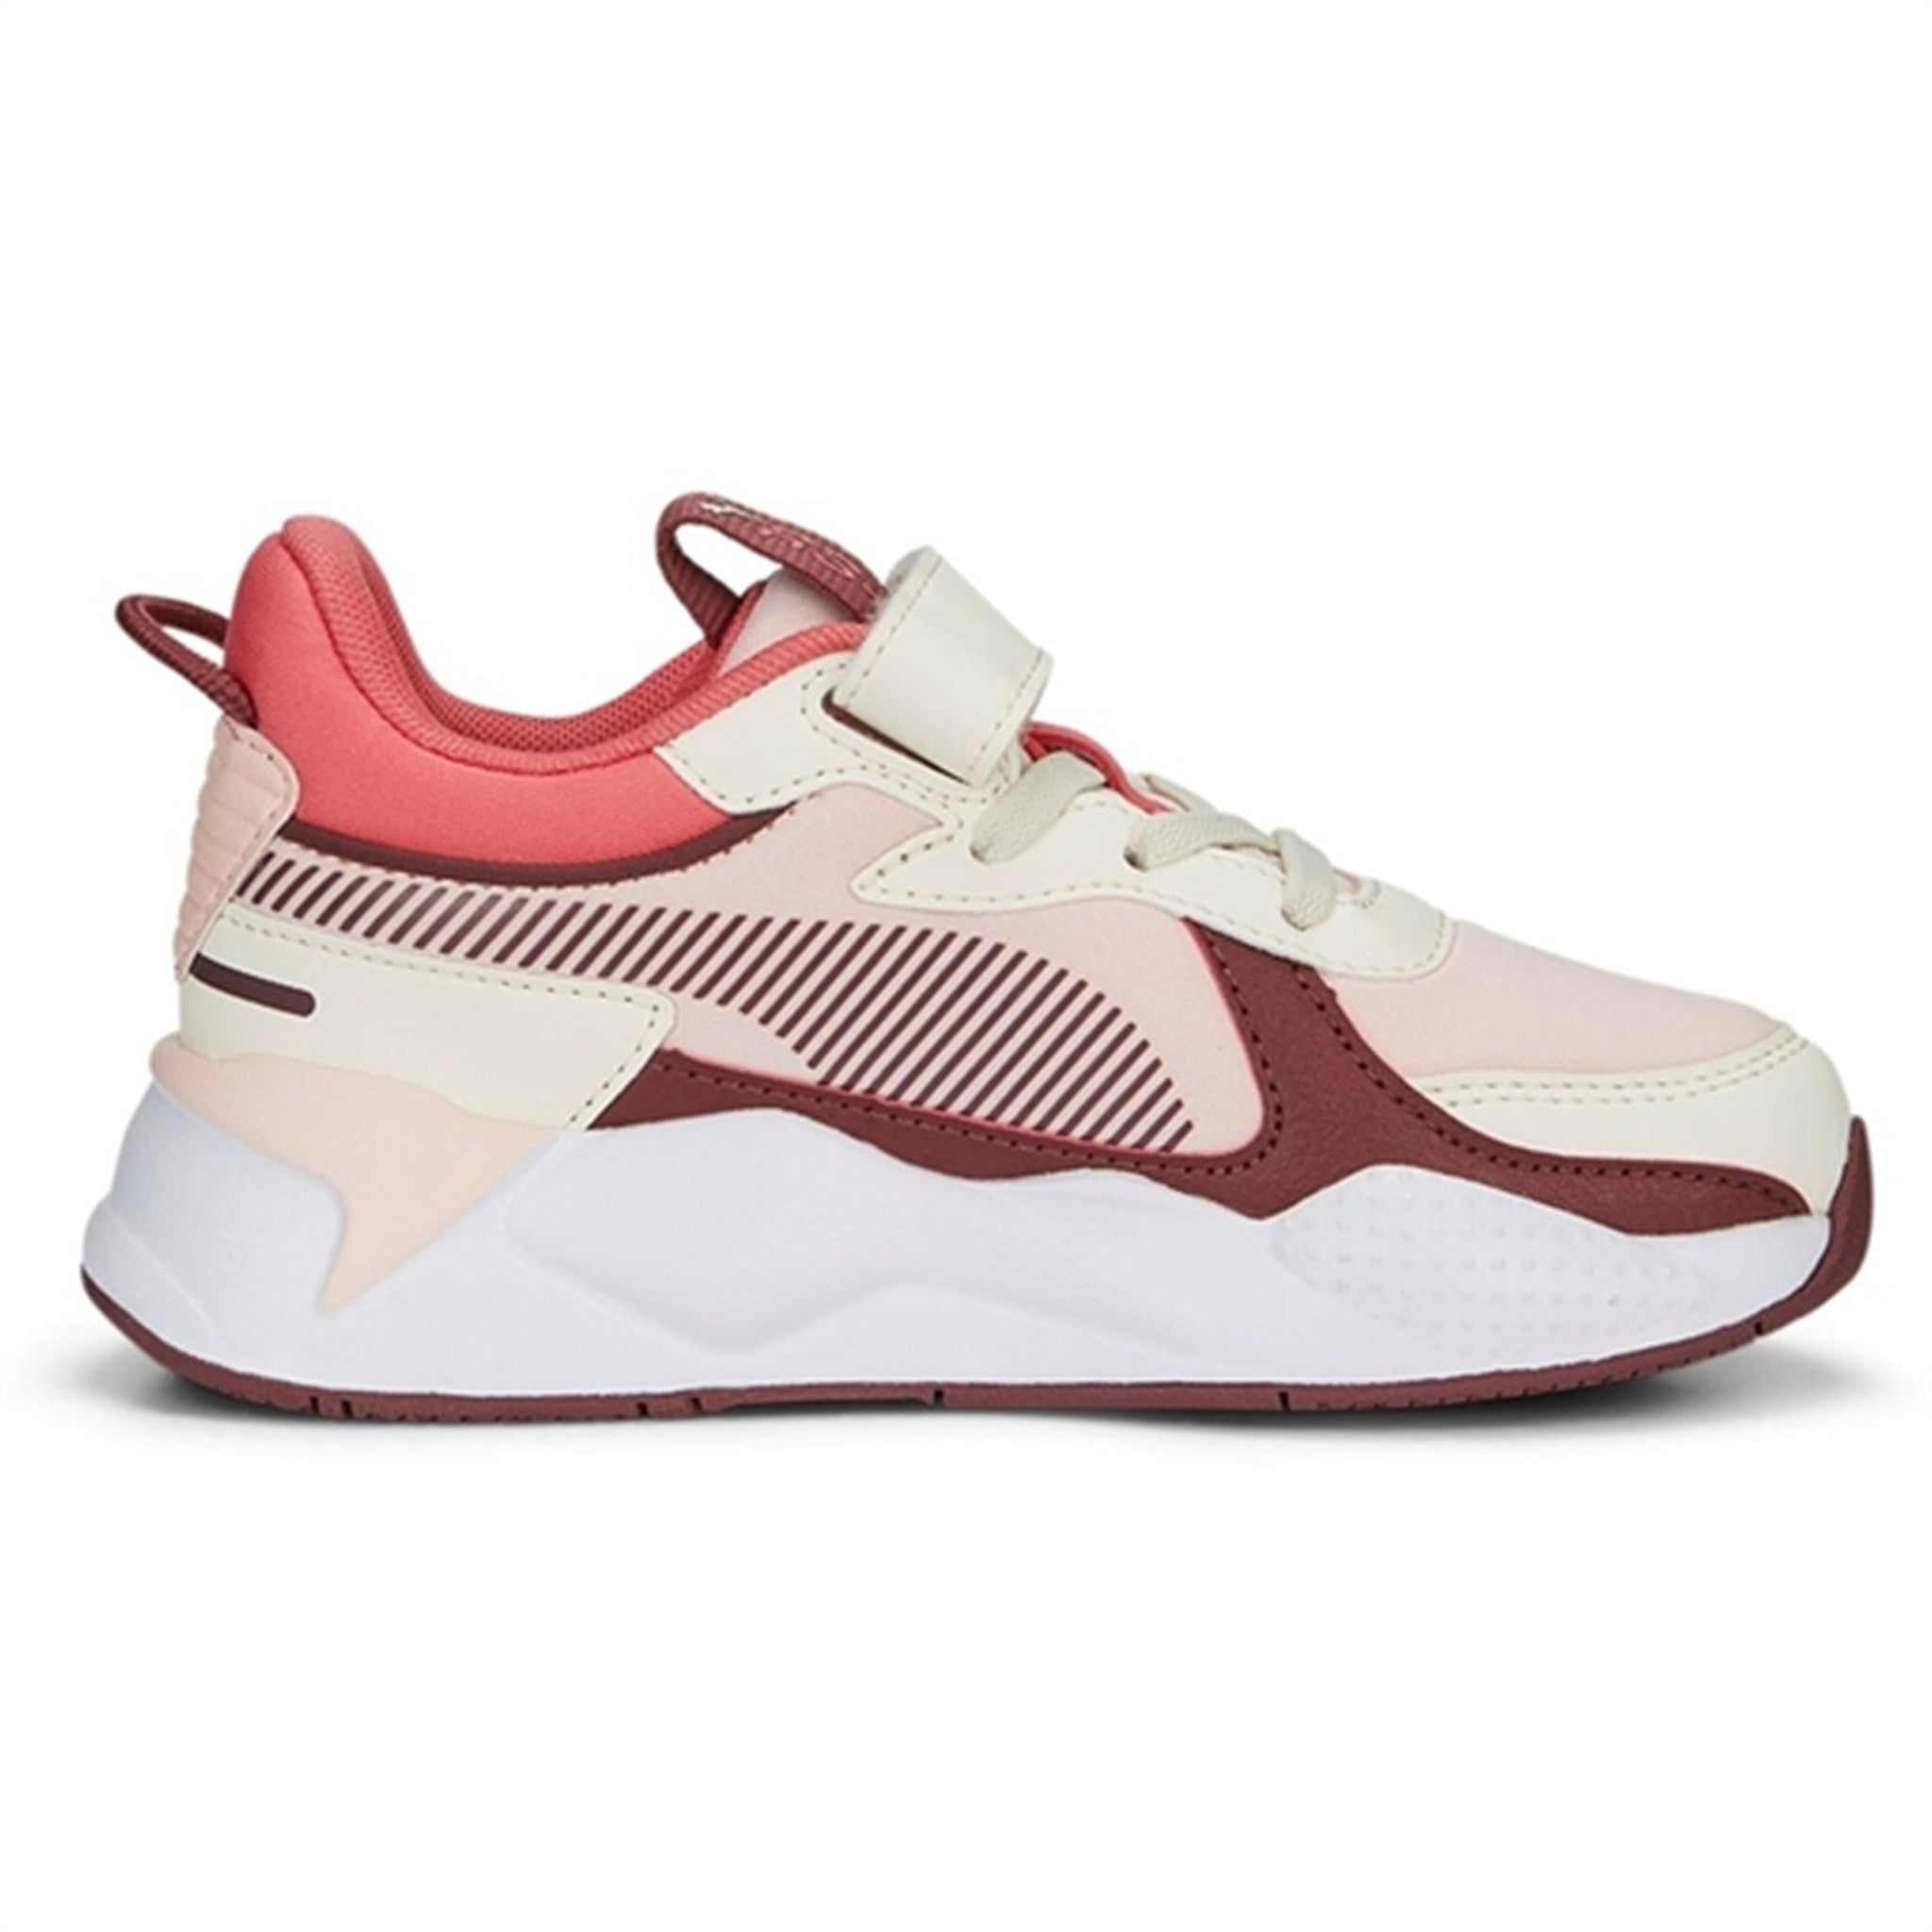 Puma RS-X Dreamy AC+ PS Rose Dust-Wood Violet Sneakers 2